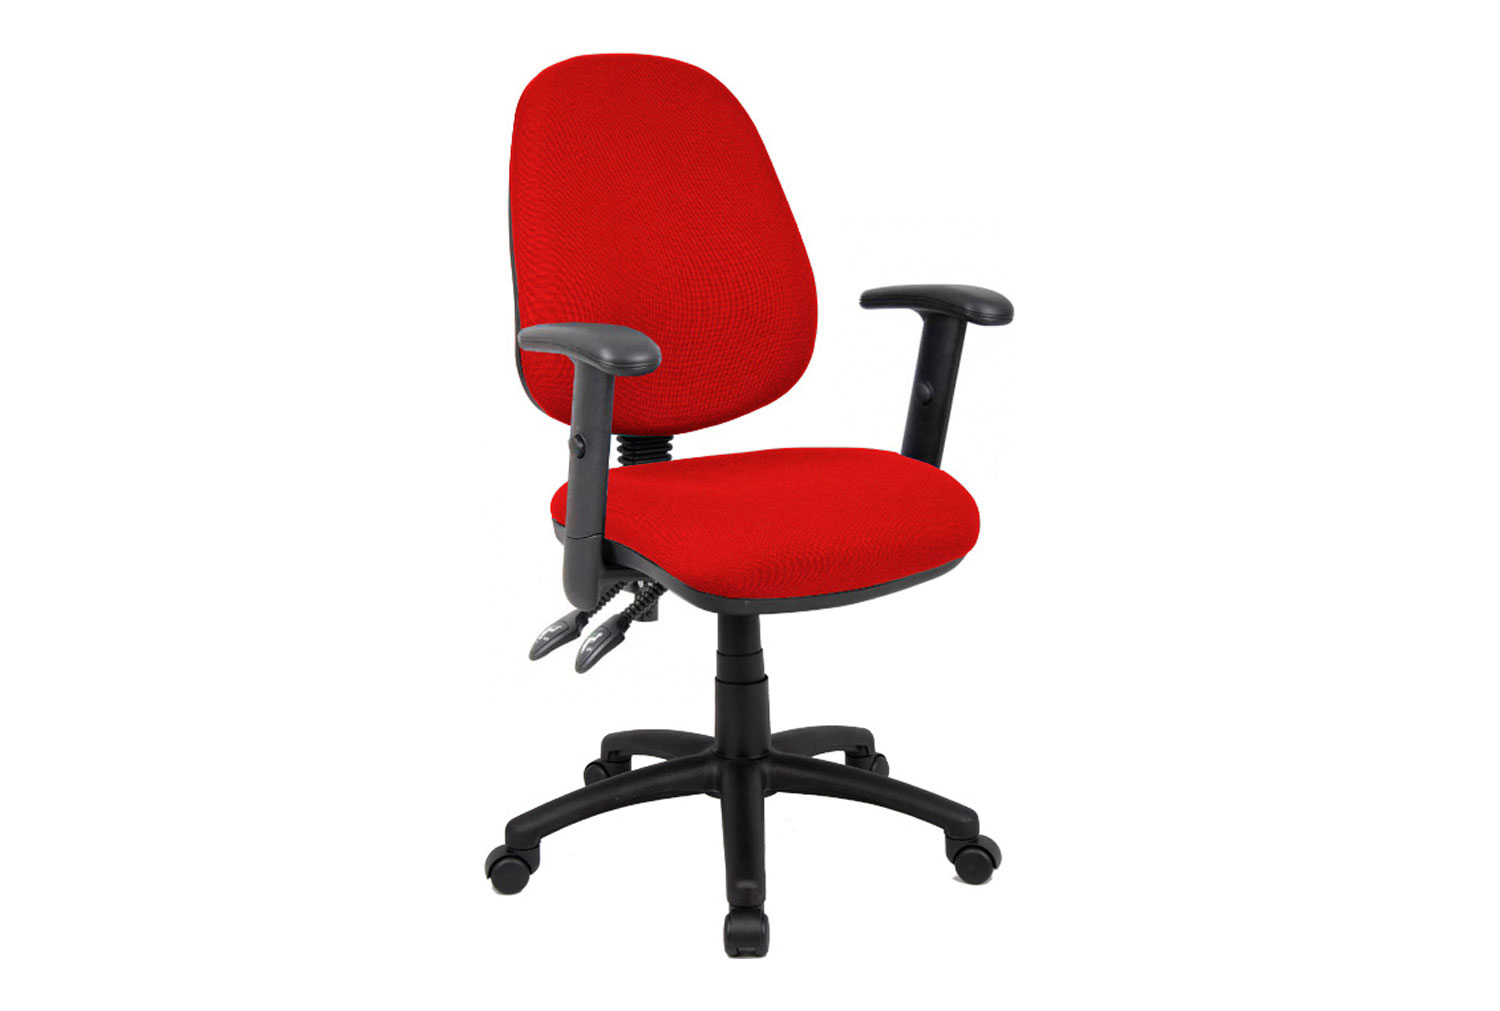 Kendall 2 Lever High Back Operator Office Chair, With Adjustable Arms, Burgundy, Express Delivery